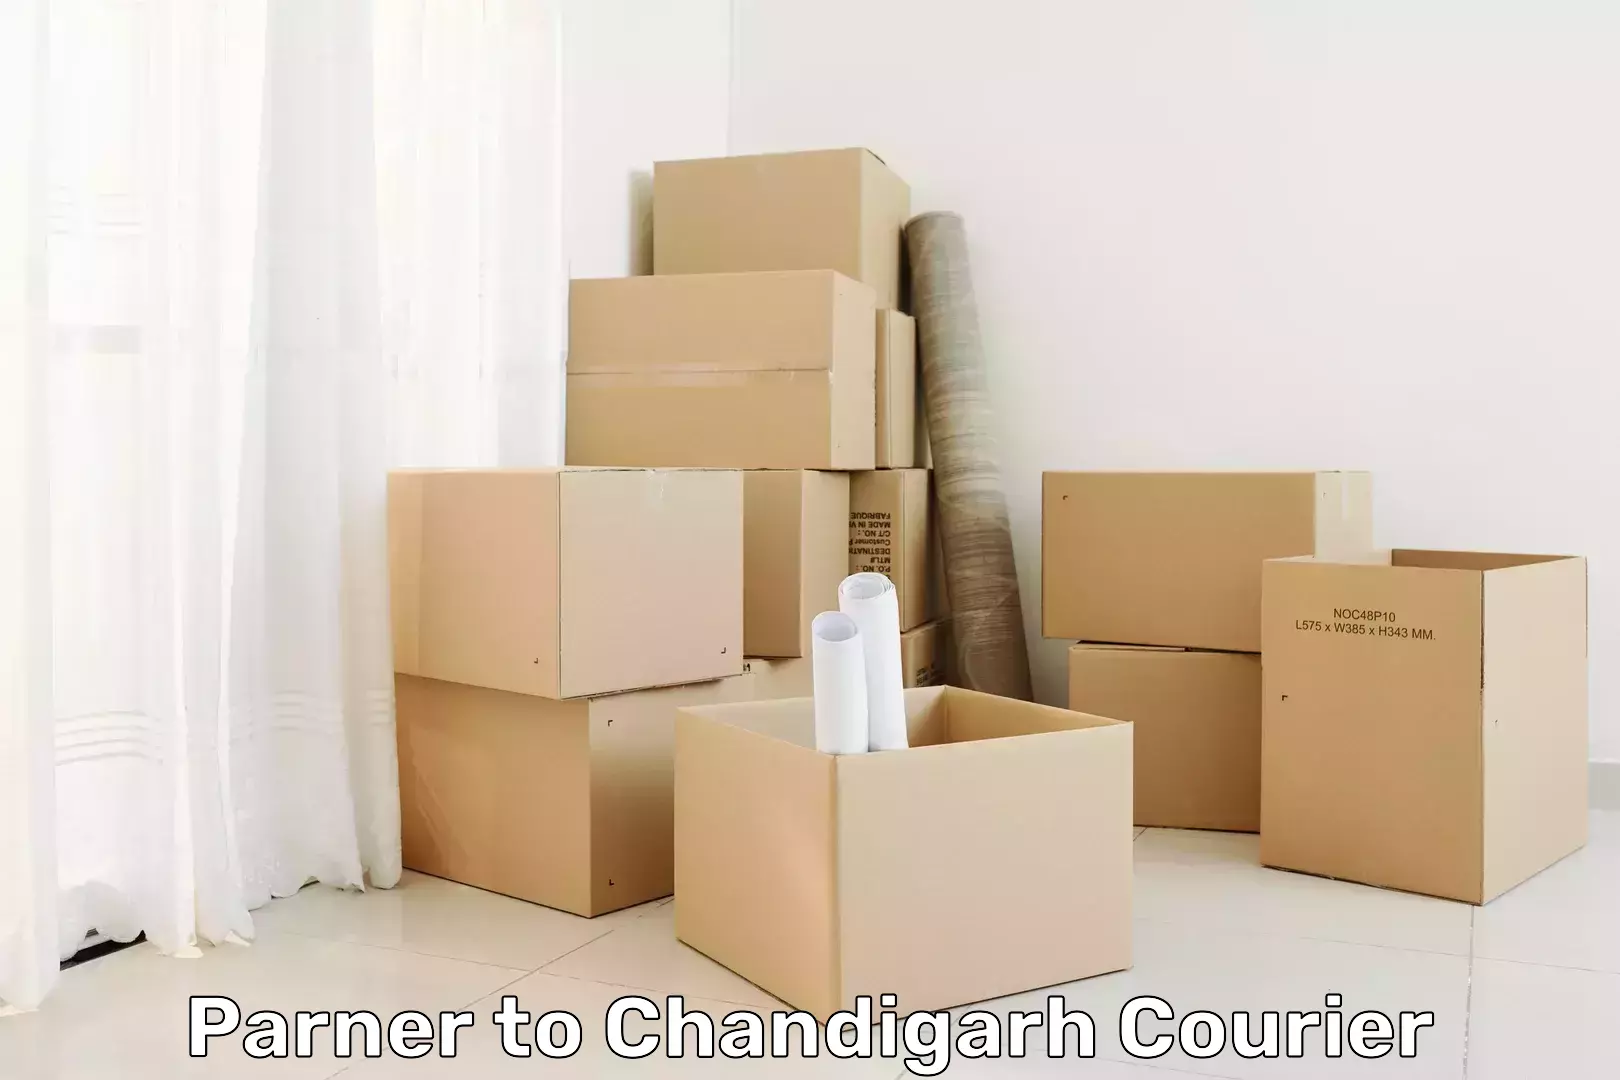 Nationwide parcel services Parner to Chandigarh